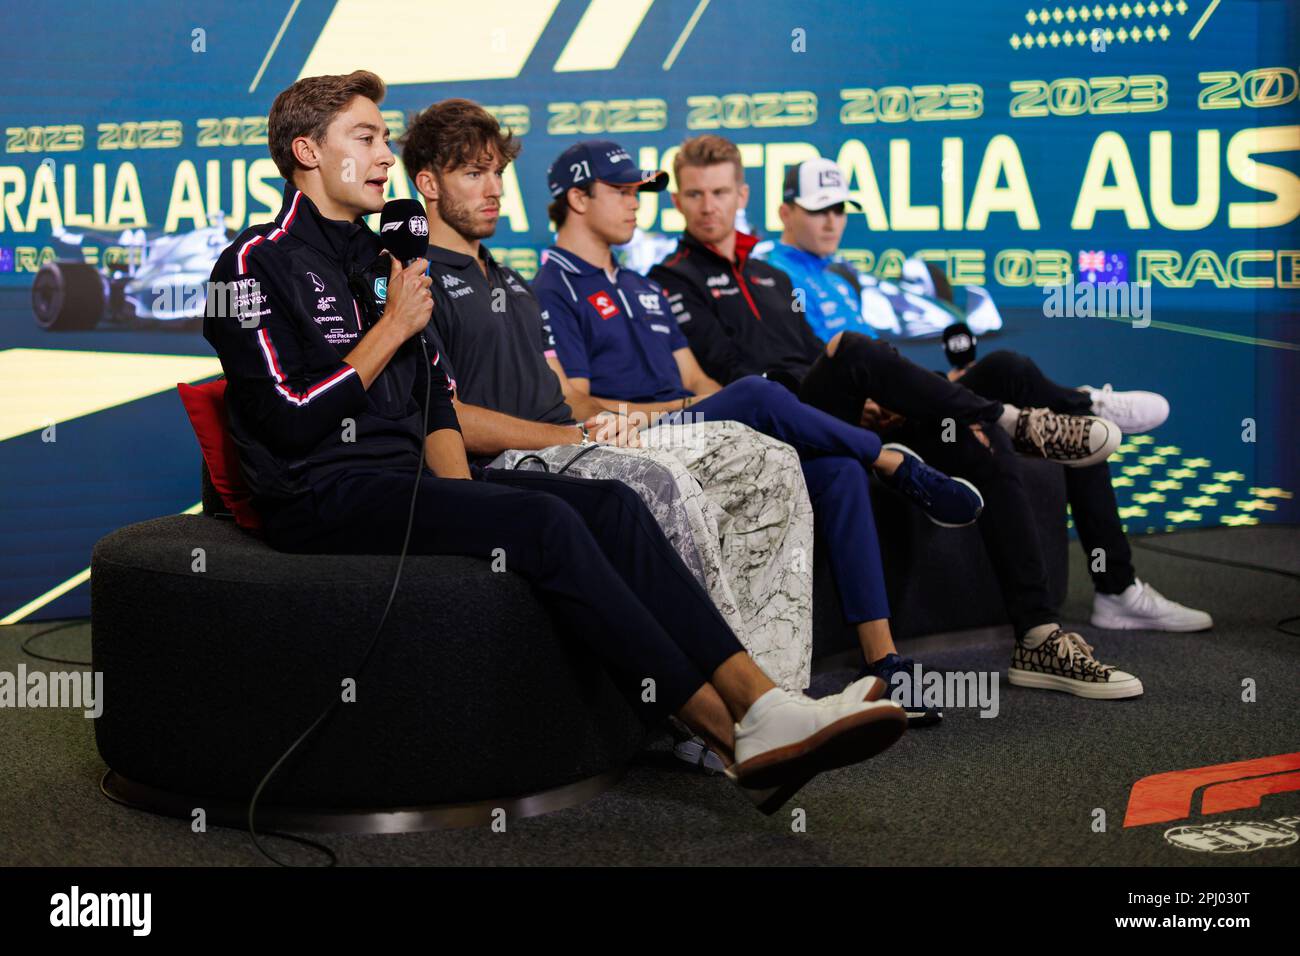 Albert Park, 30th March 2023 George Russell (GBR) of team Mercedes, Pierre Gasly (FRA) of team Alpine, Nyck De Vries (NED) of Team AlphaTauri, Nico Hulkenberg (GER) of the Haas F1 team and Logan Sargeant of team Williams at a presser during the 2023 Australian Formula 1 Grand Prix. corleve/Alamy Live News Stock Photo